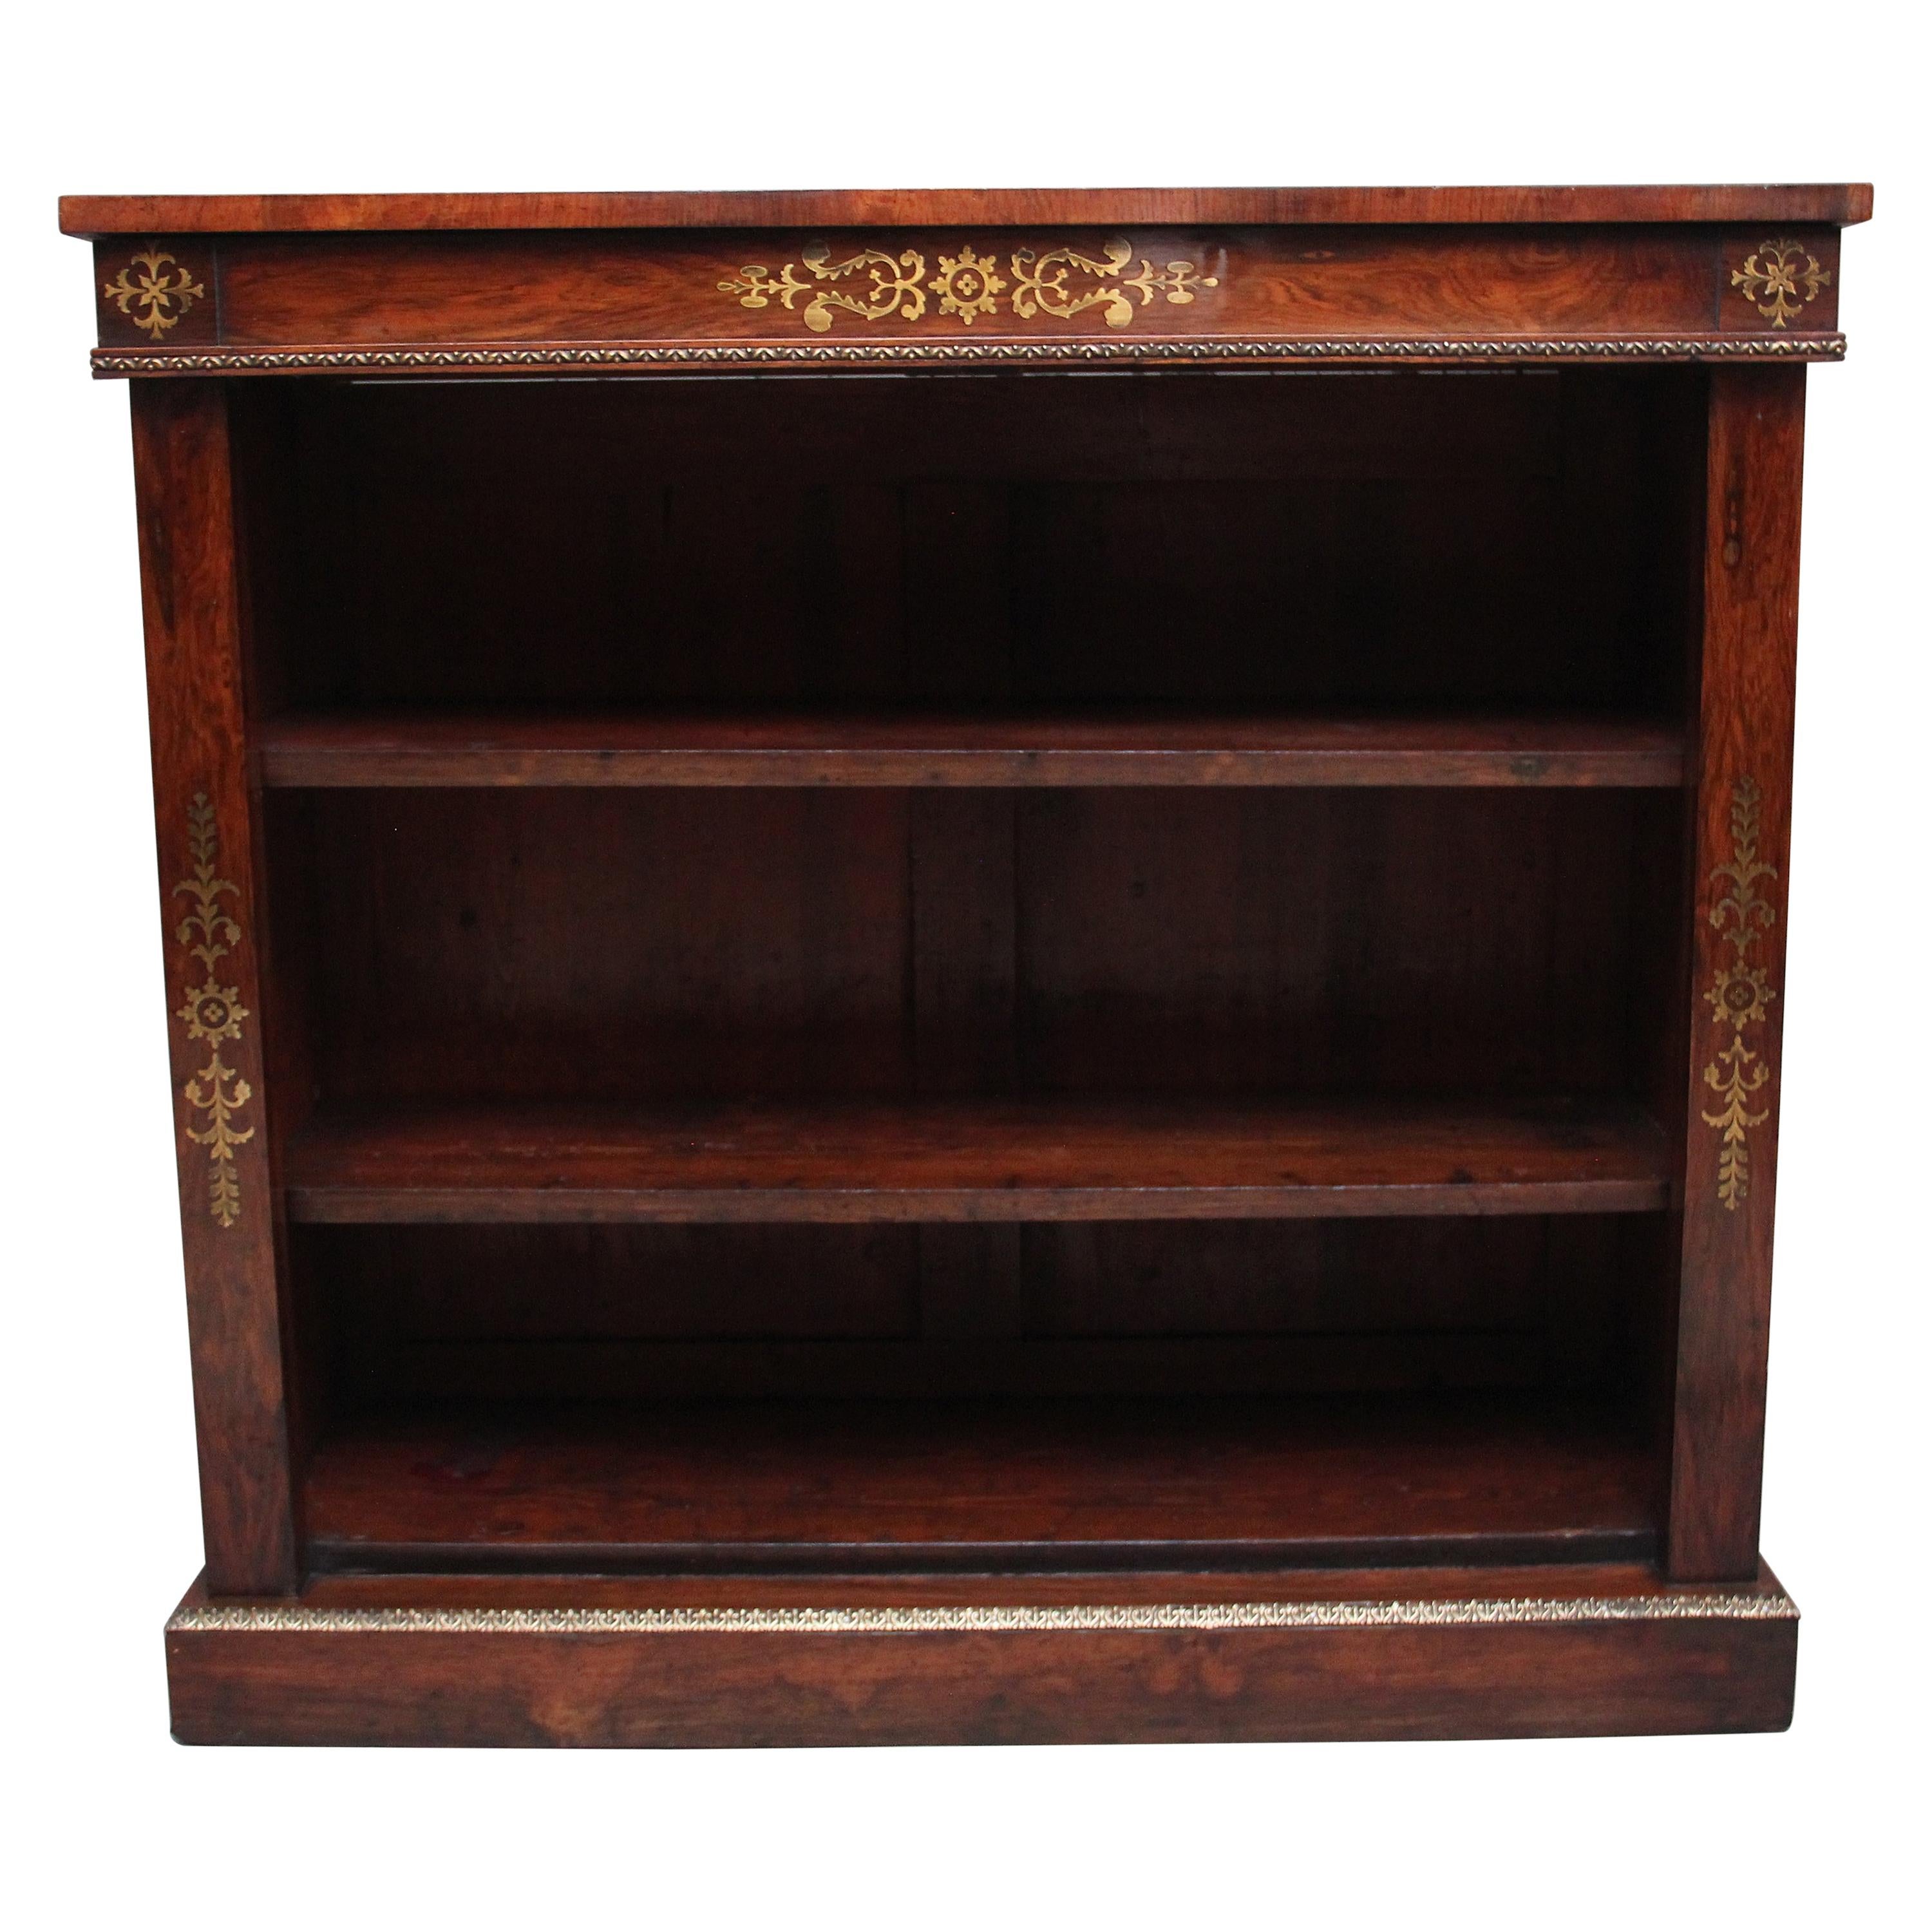 Early 19th Century Rosewood and Brass Inlaid Open Bookcase